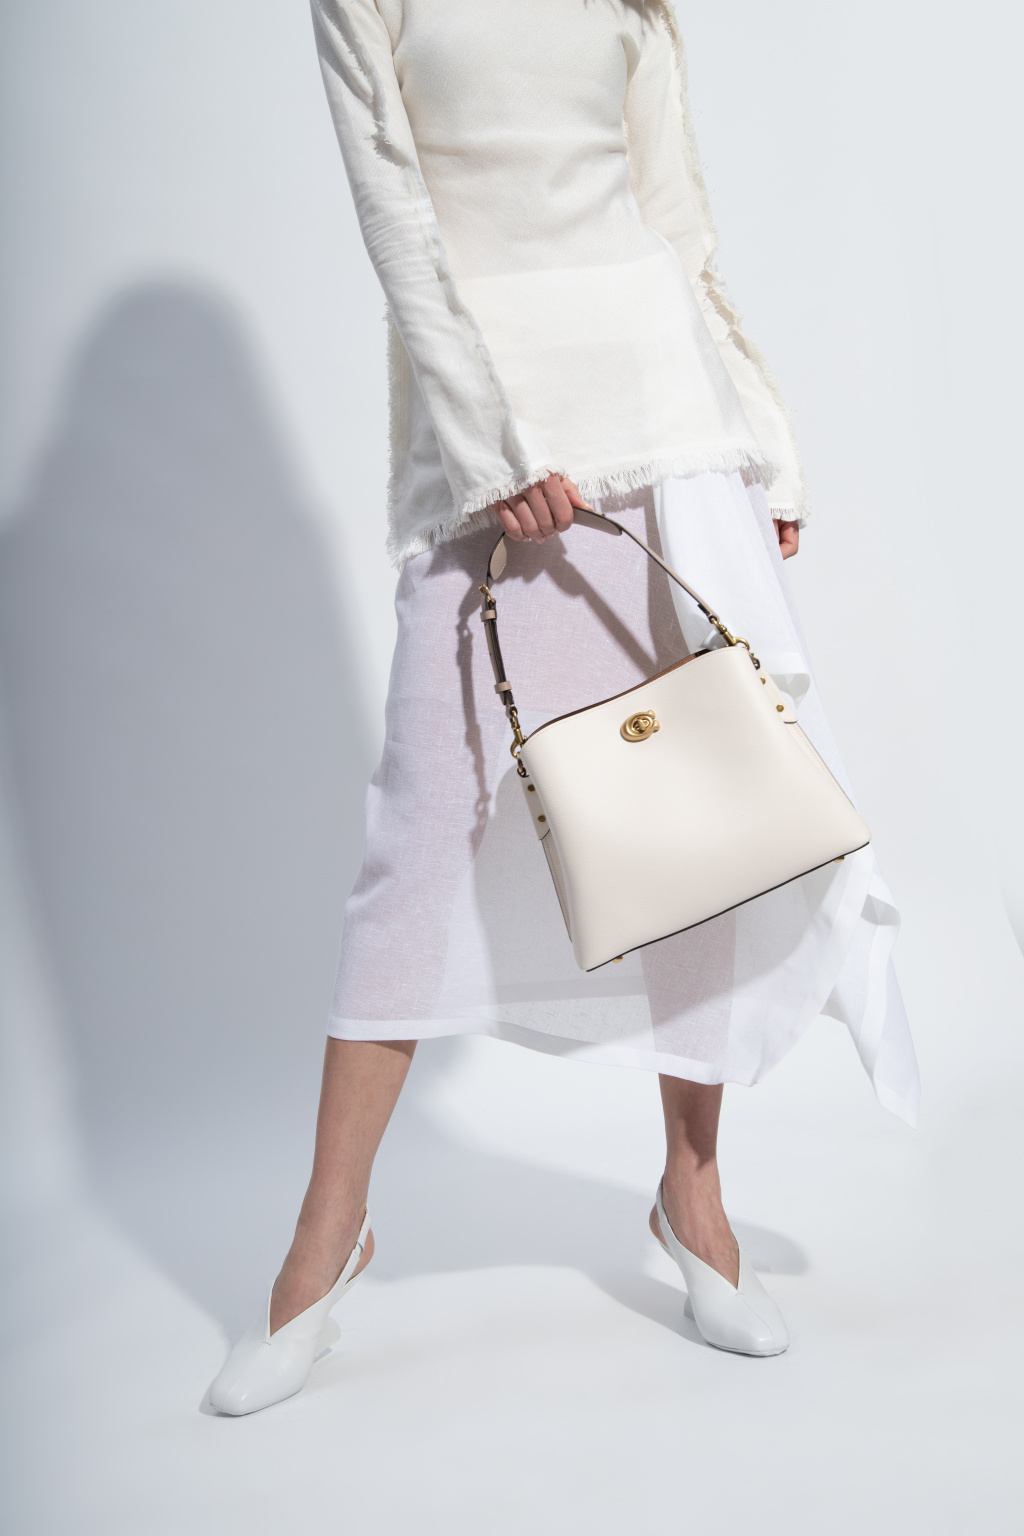 Willow Bucket Bag - Coach - Cream - Leather